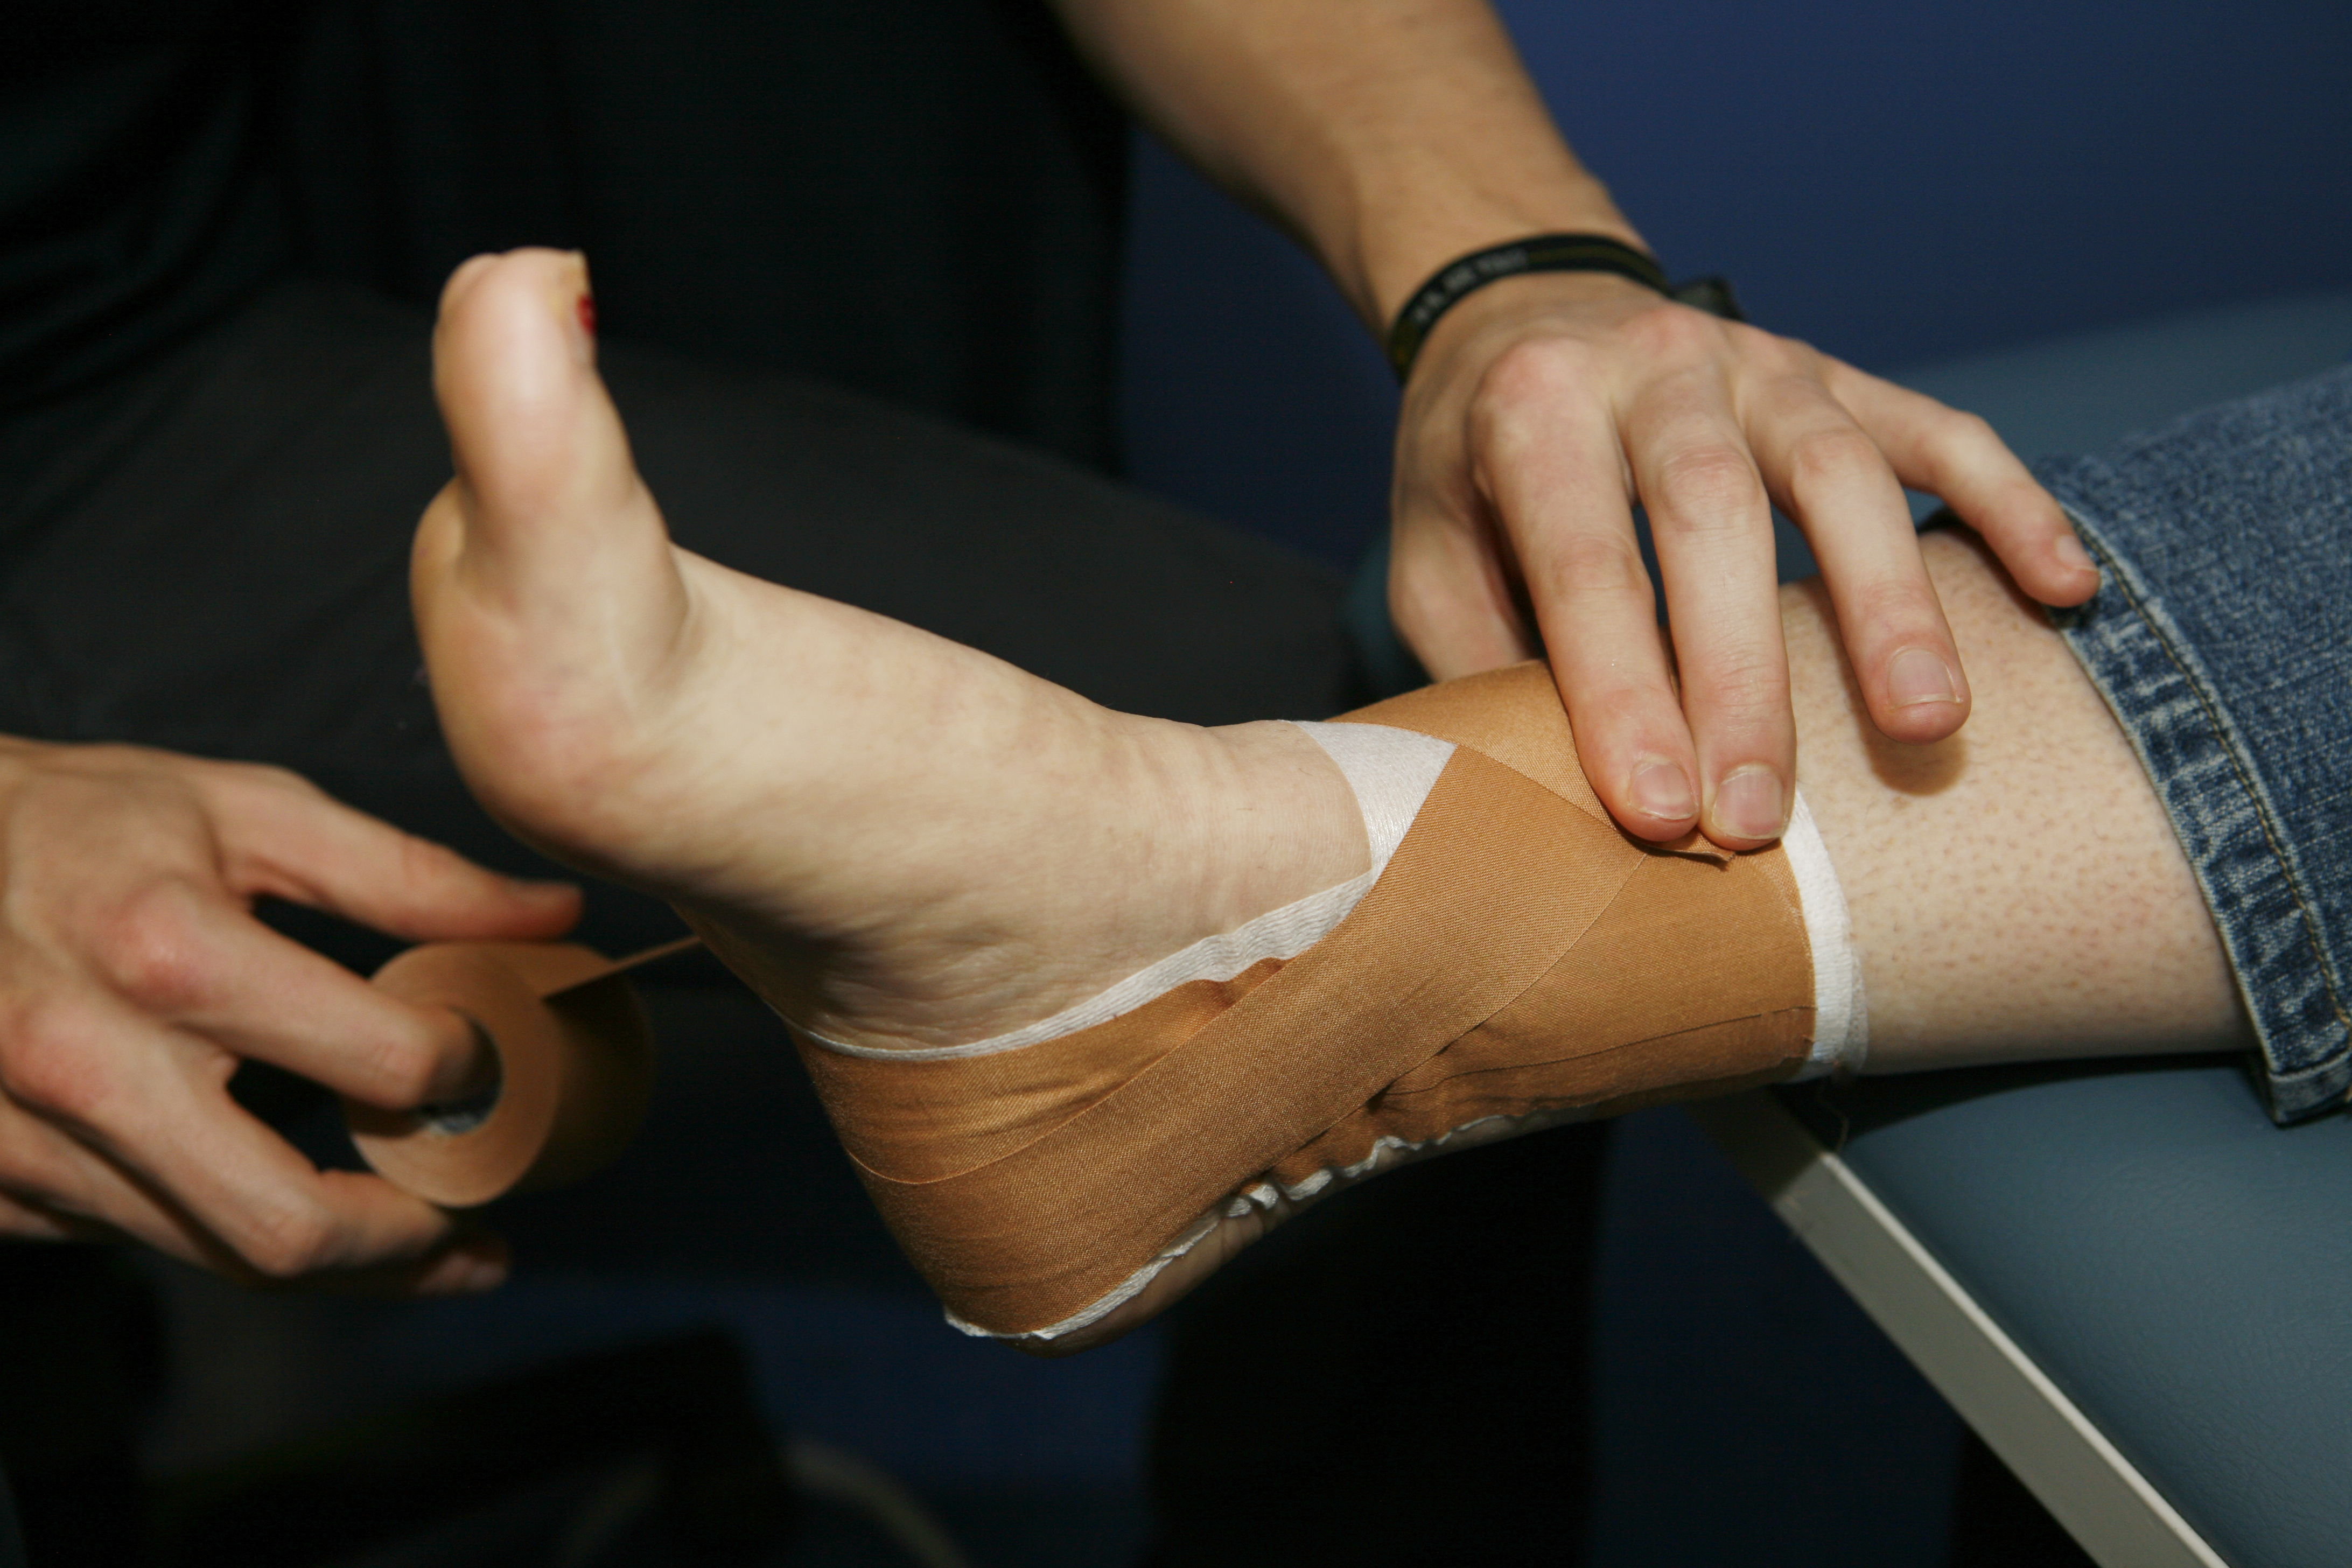 Treating Ankle Sprains with Bracing